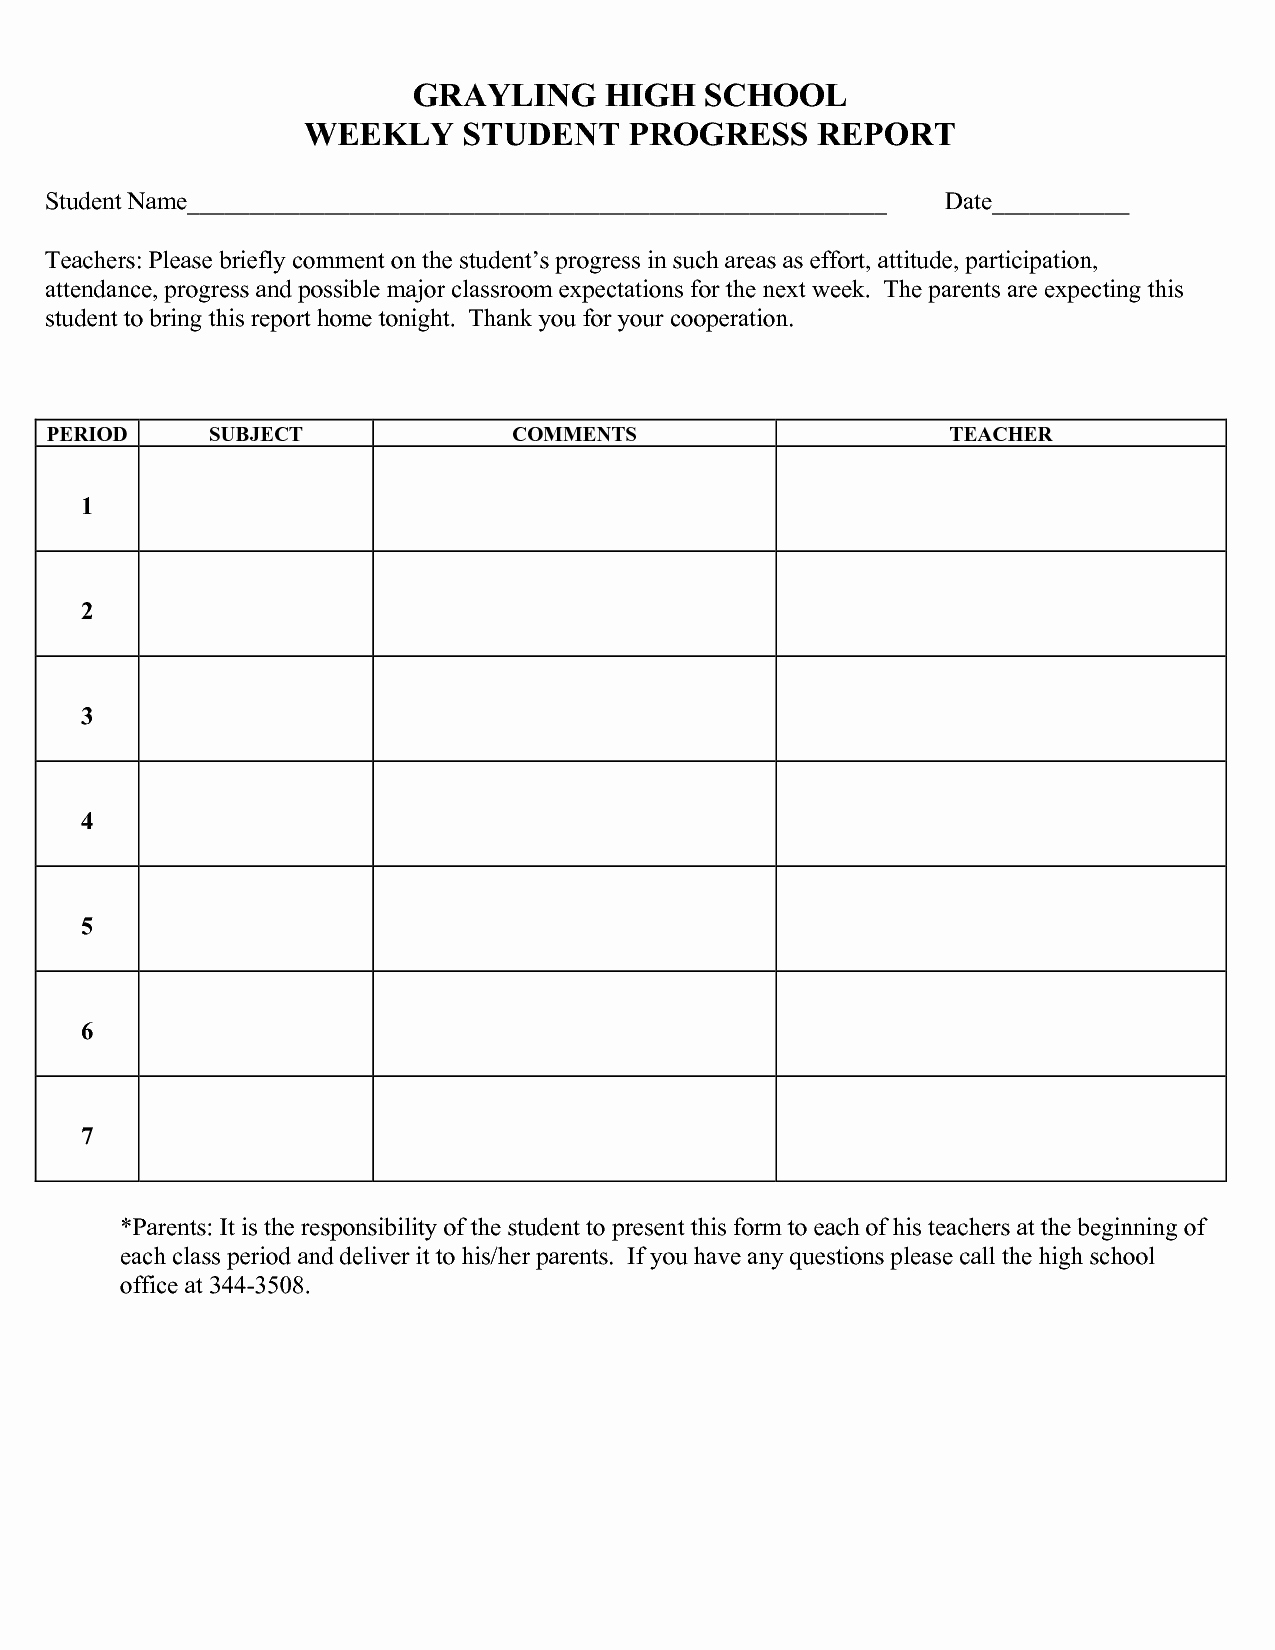 20 effective templates for helping you create weekly student progress report